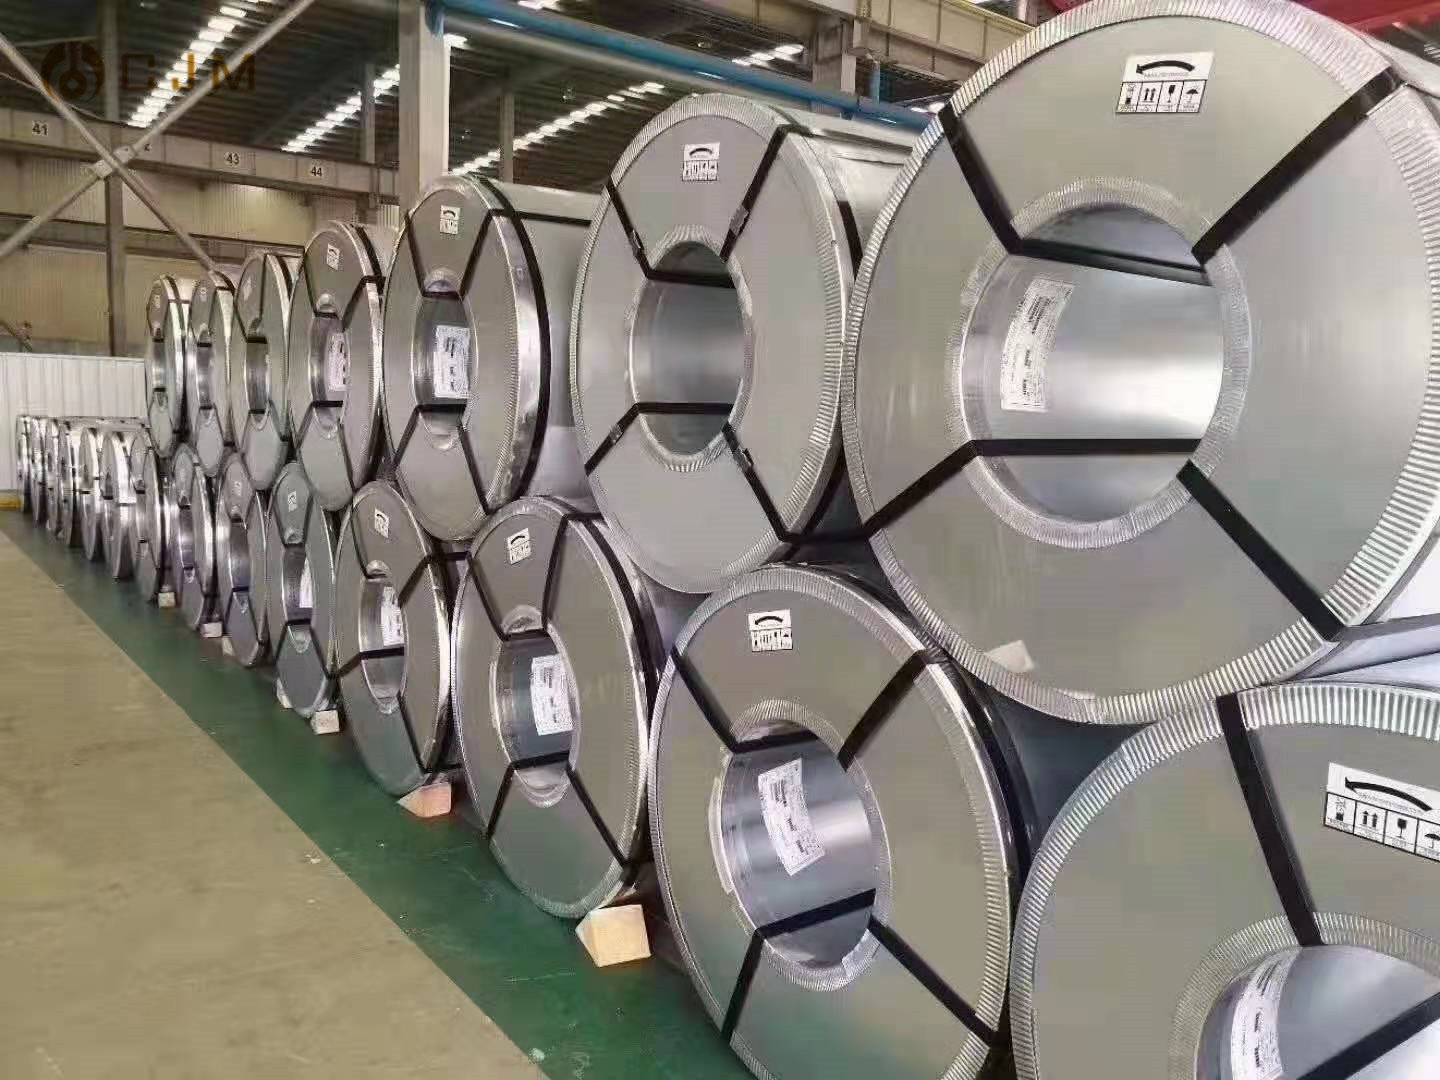 Type 347H Polished Coloured Cold Rolled Stainless Steel Coil